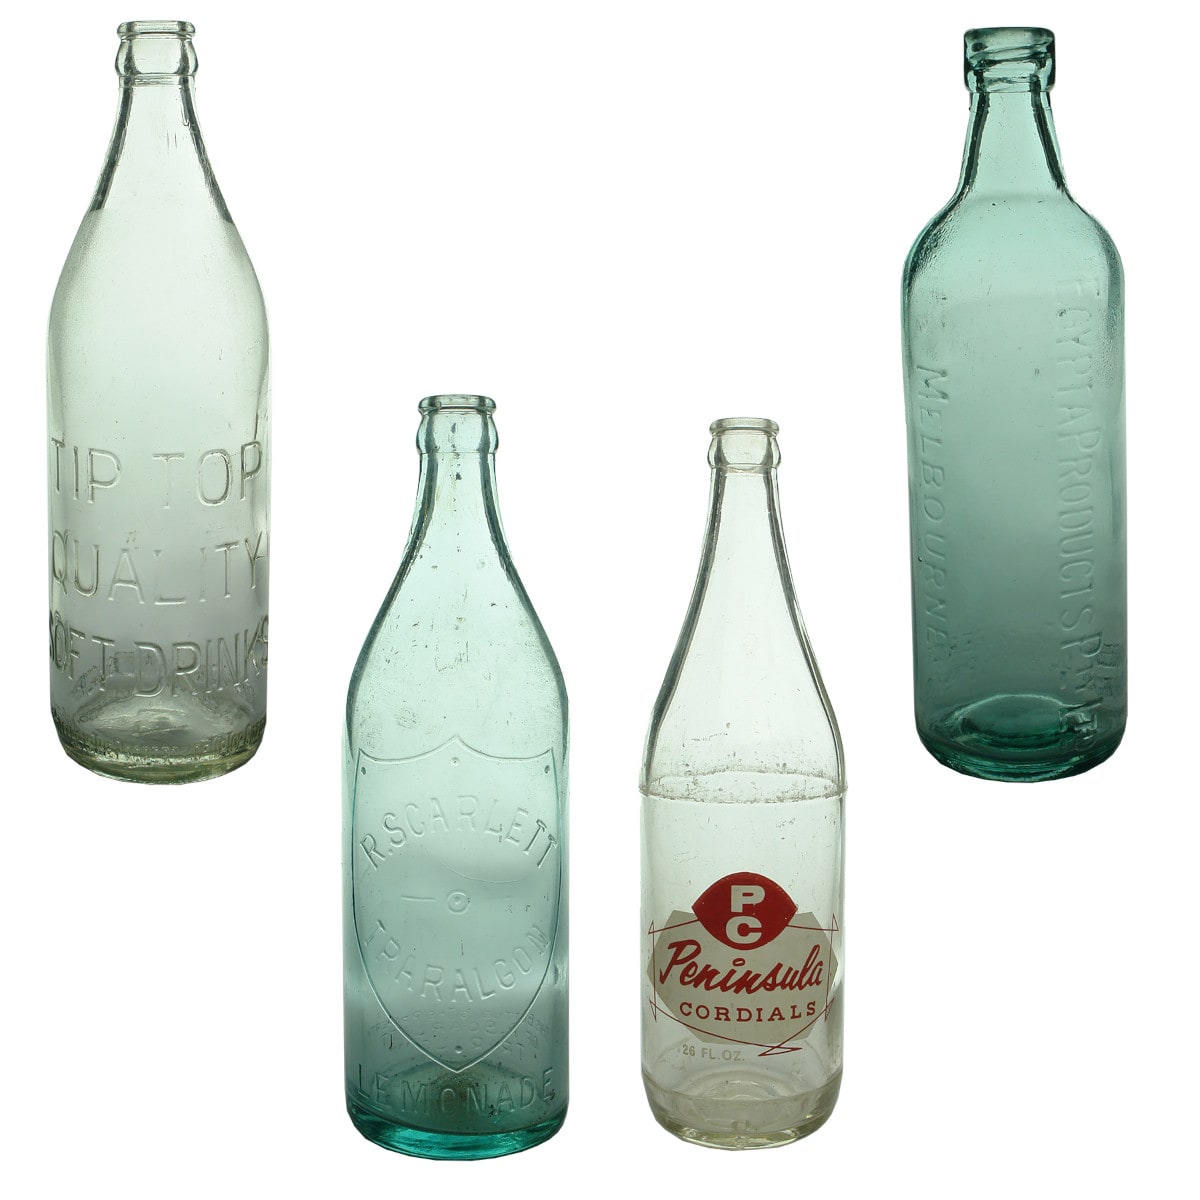 Four large Aerated Waters: Tip Top, Footscray; Scarlett, Traralgon; Peninsula Cordials, Frankston; Egypta Products Melbourne. (Victoria)